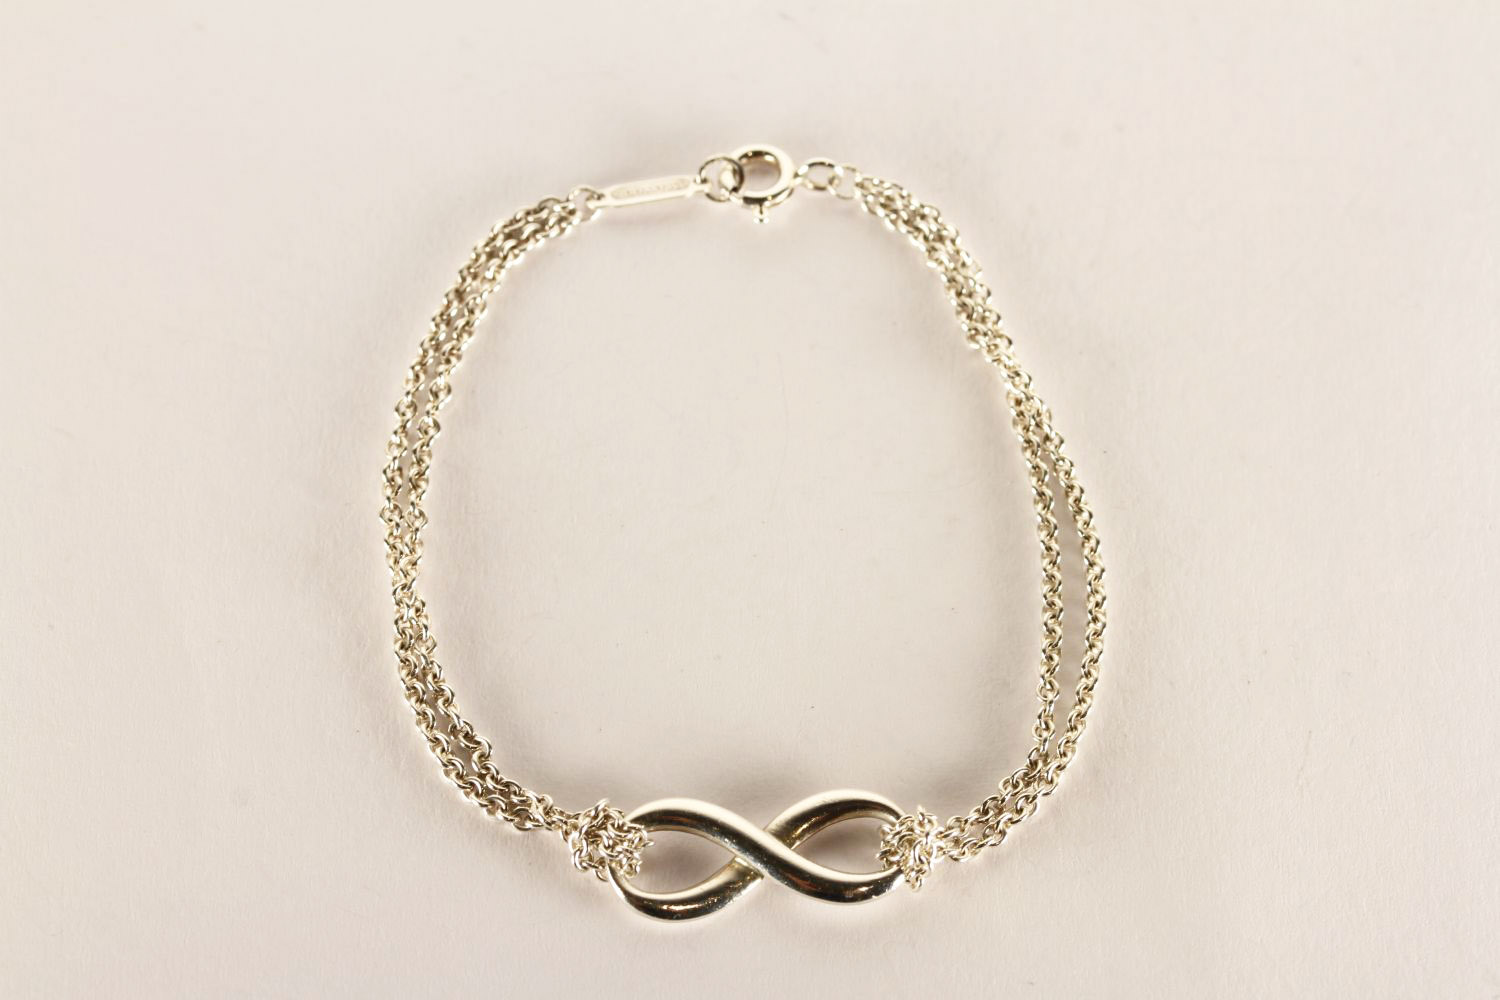 Tiffany & Co Infinity Bracelet, stamped sterling silver, approximate length 14.5cm, comes with a - Image 2 of 3